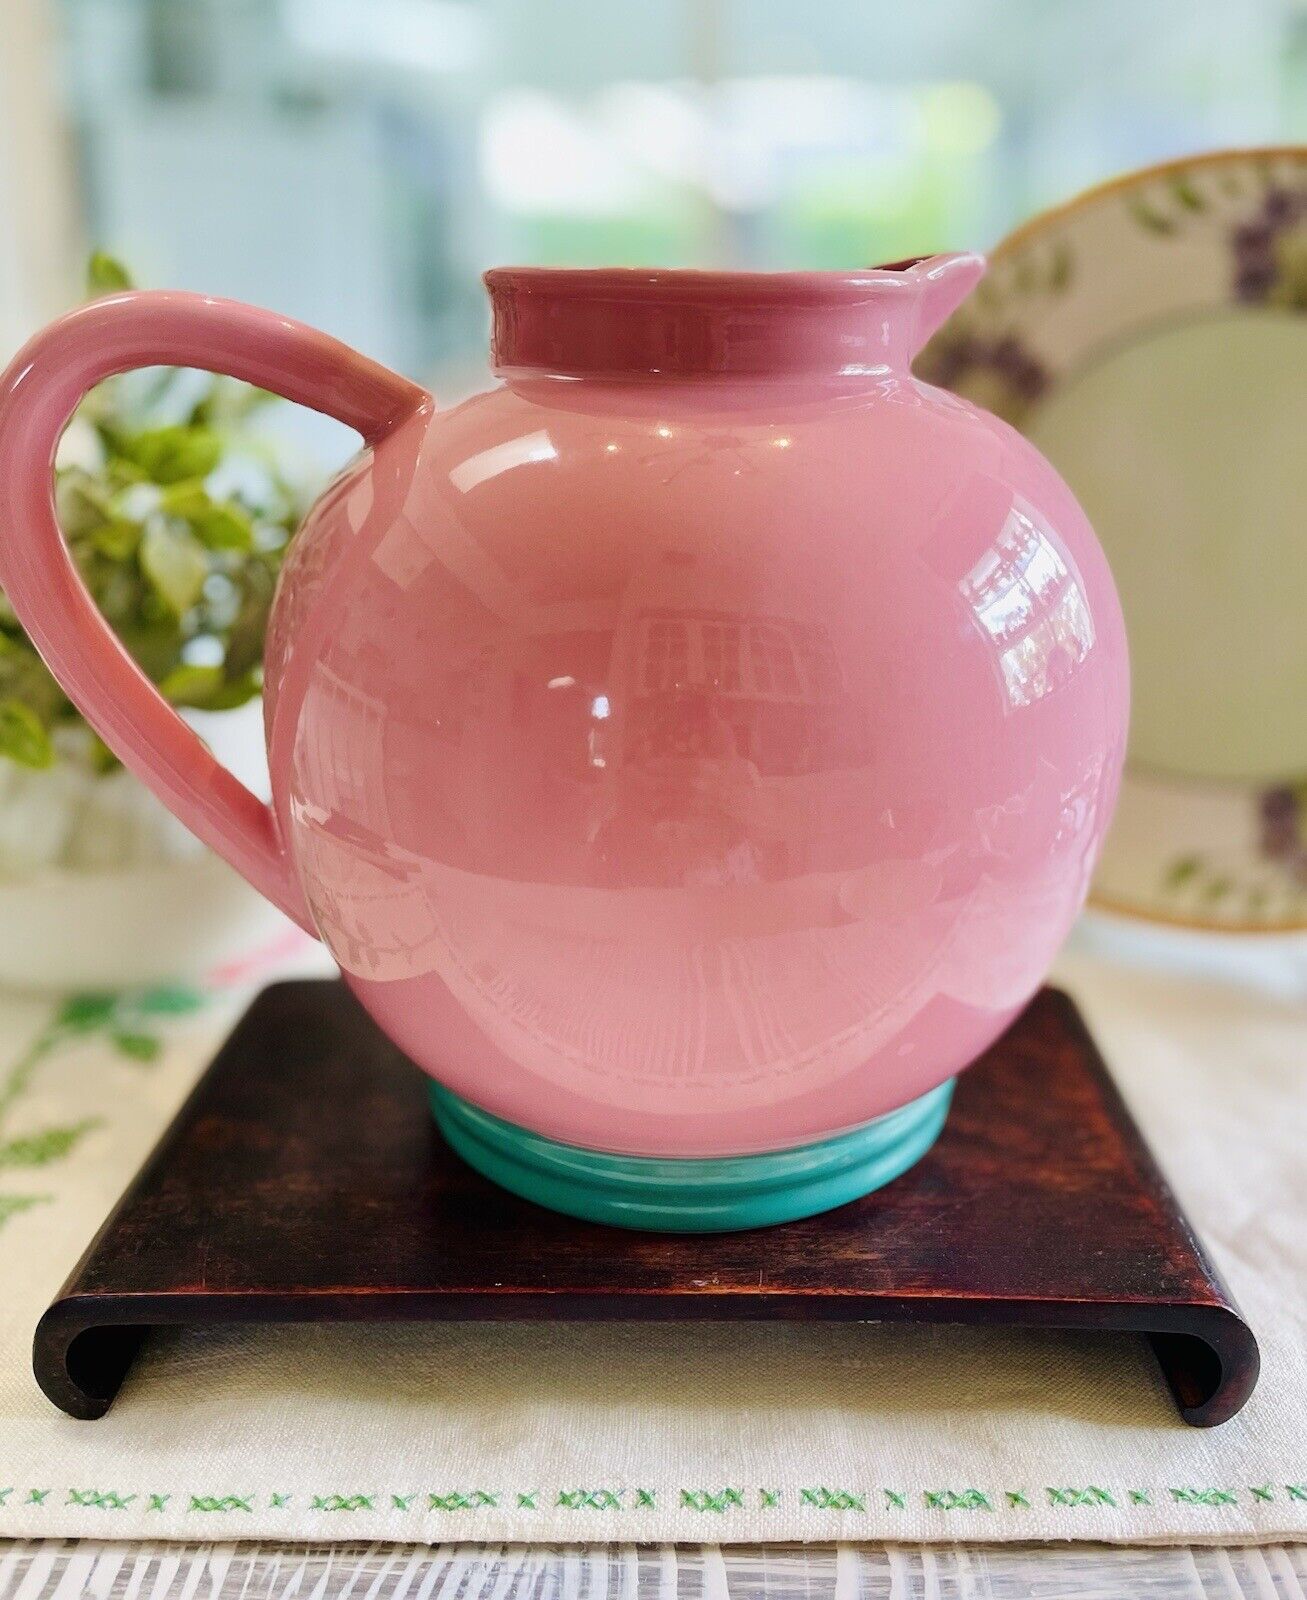 Pitcher 2.5 Quart Lindt-Stymeist COLORWAYS pattern Pink Turquoise Trim~ Fatbelly